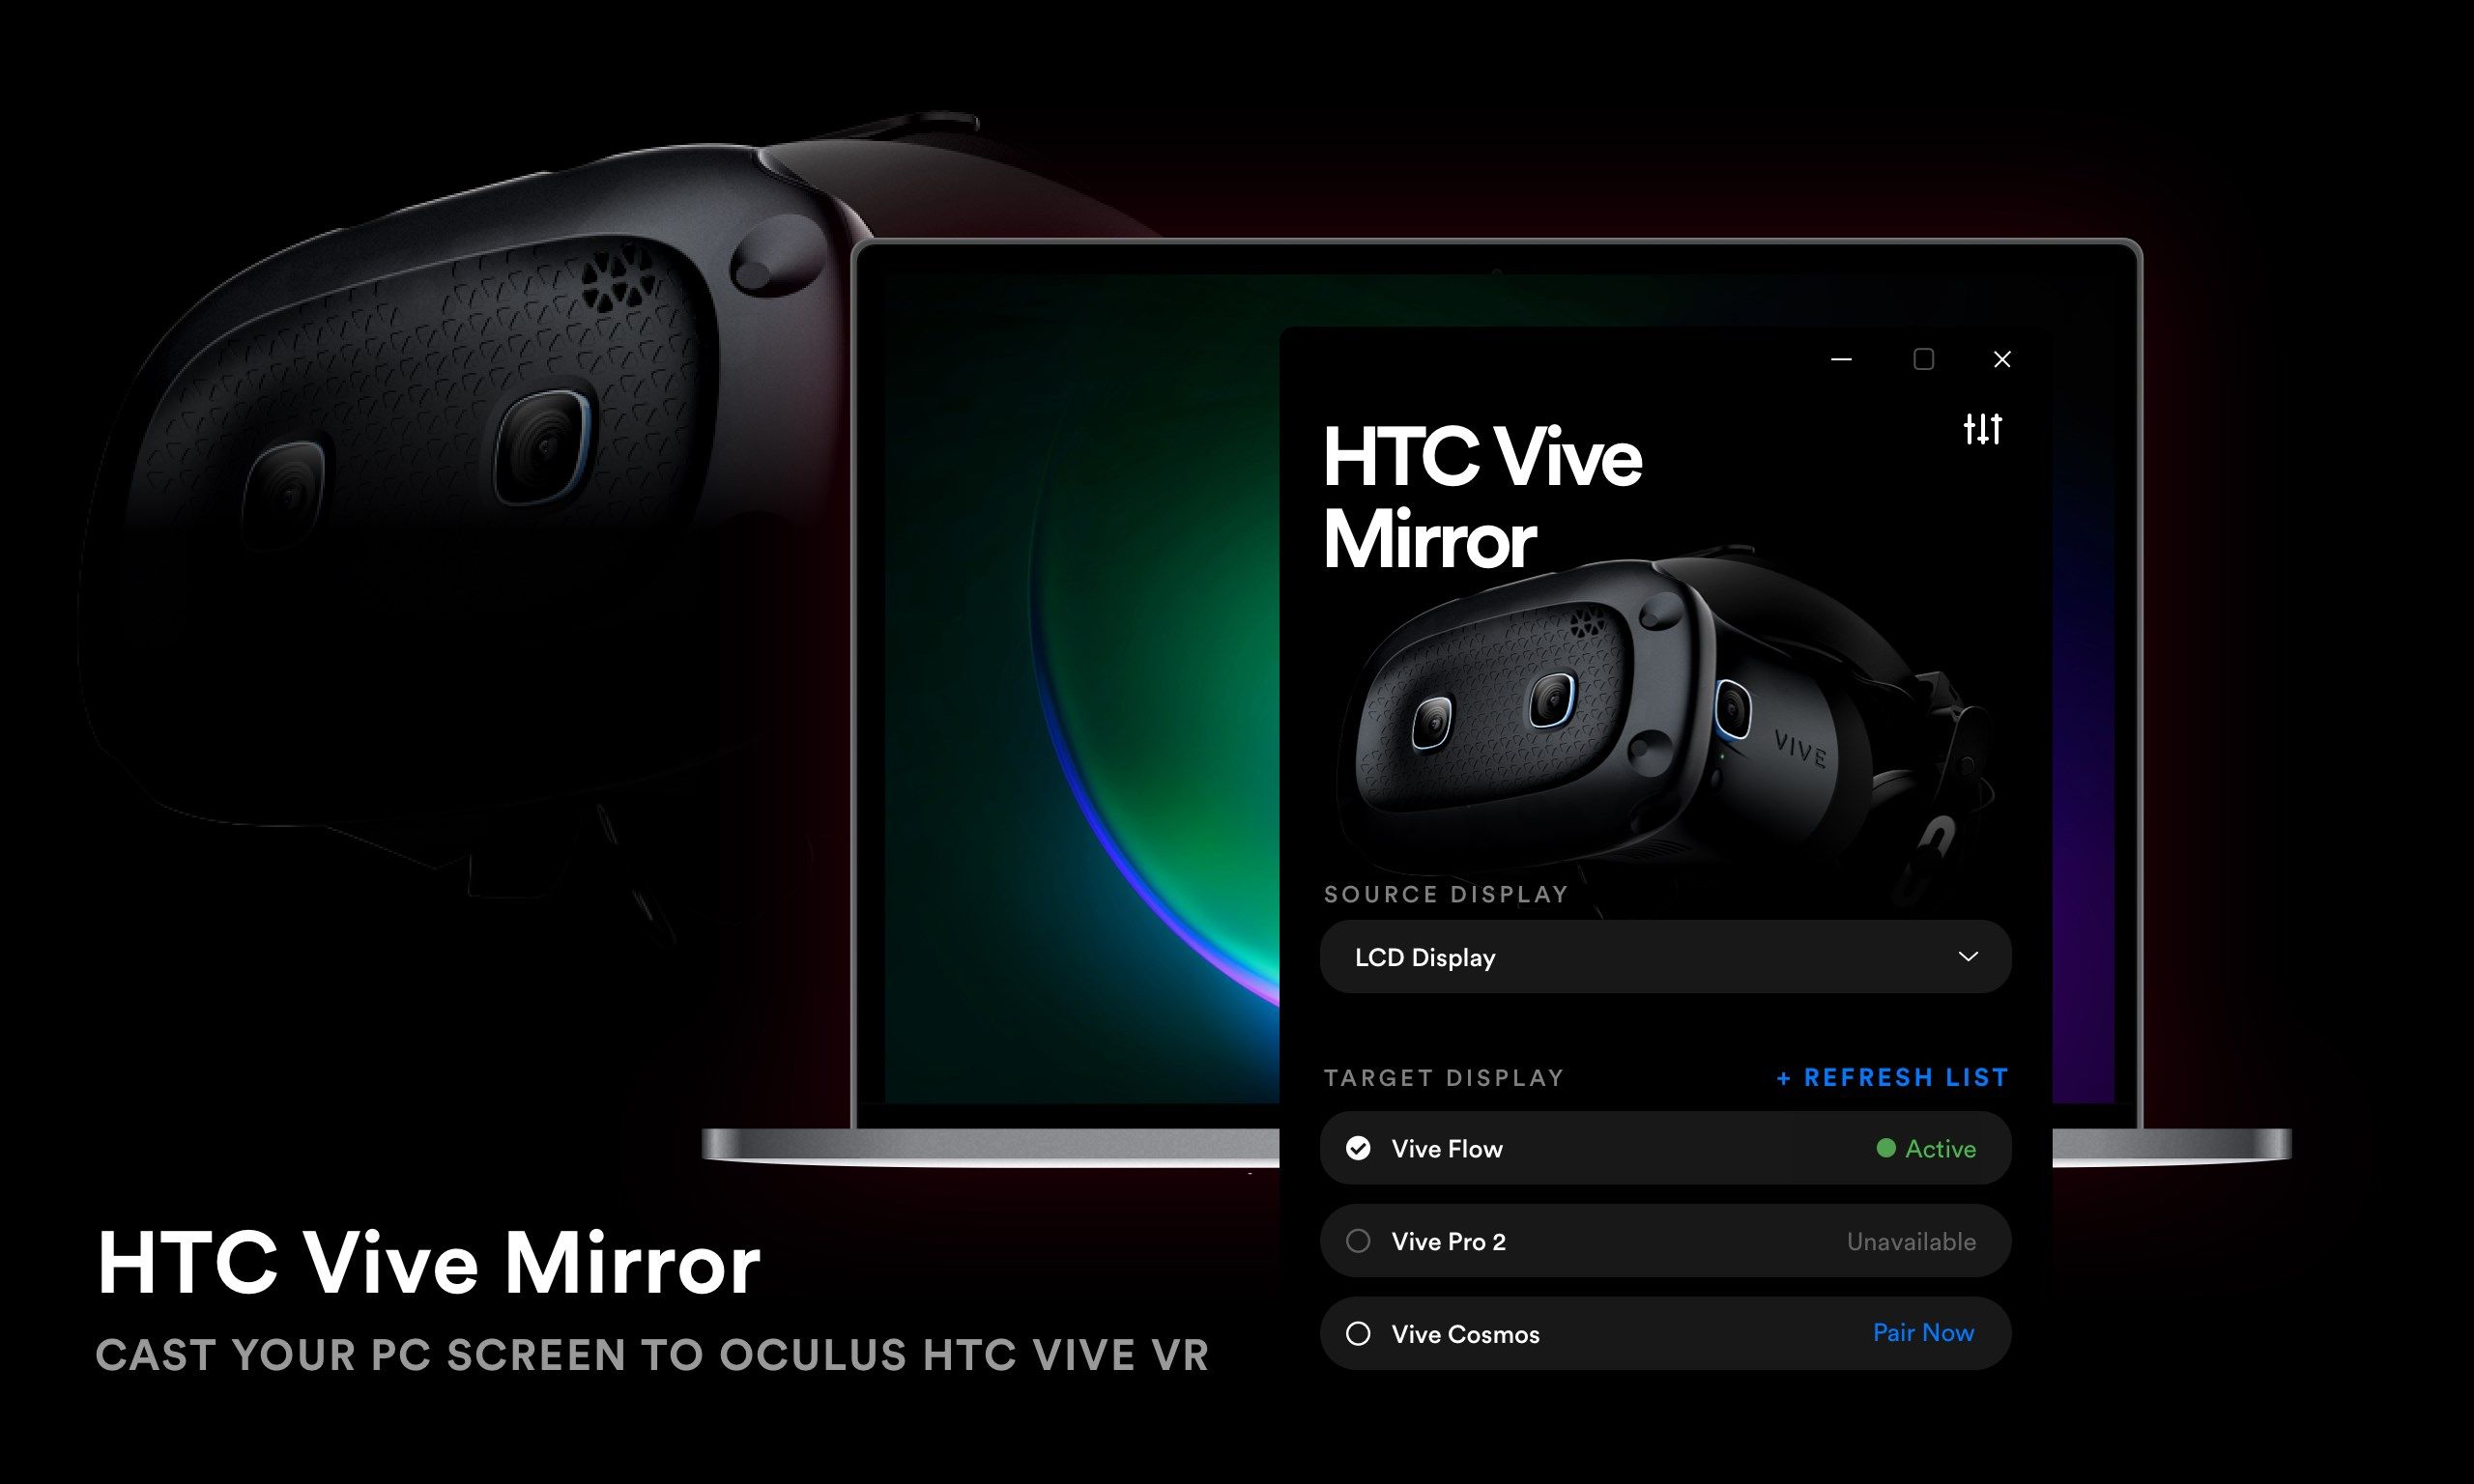 Mirror for HTC Vive